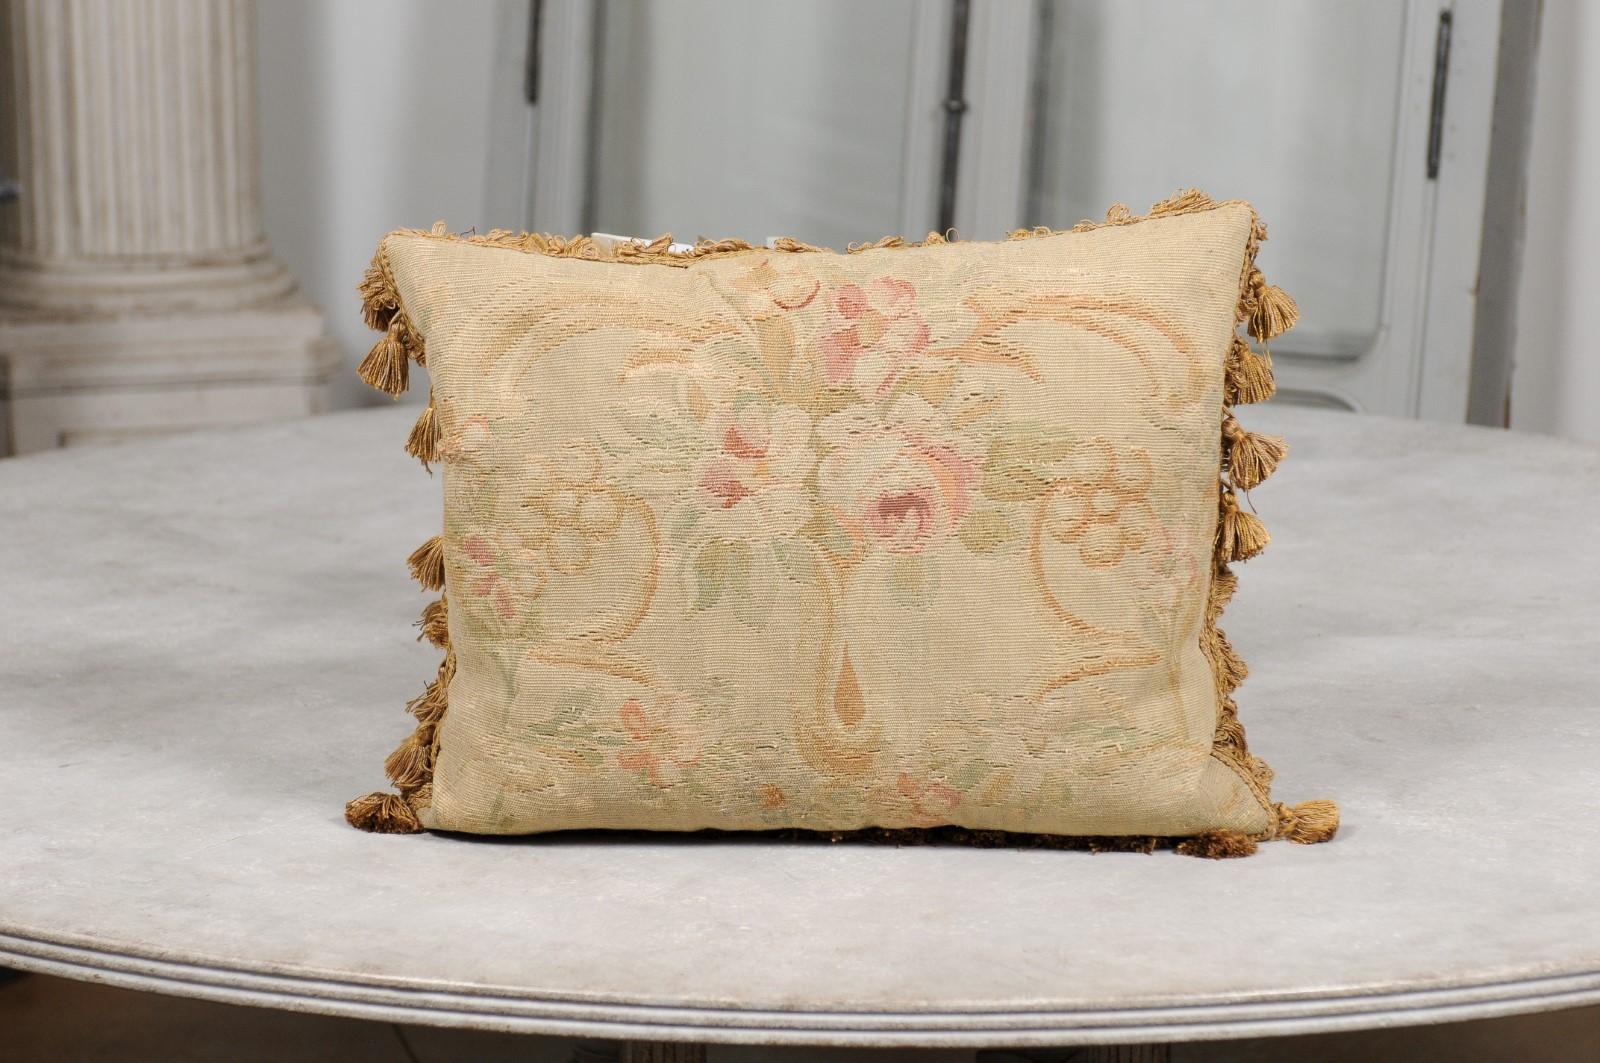 A French Aubusson tapestry pillow from the 19th century, with bouquet of flowers and tassels. Woven during the 19th century in the Aubusson tapestry manufacture located in central France, this horizontal pillow features a central bouquet of pink and